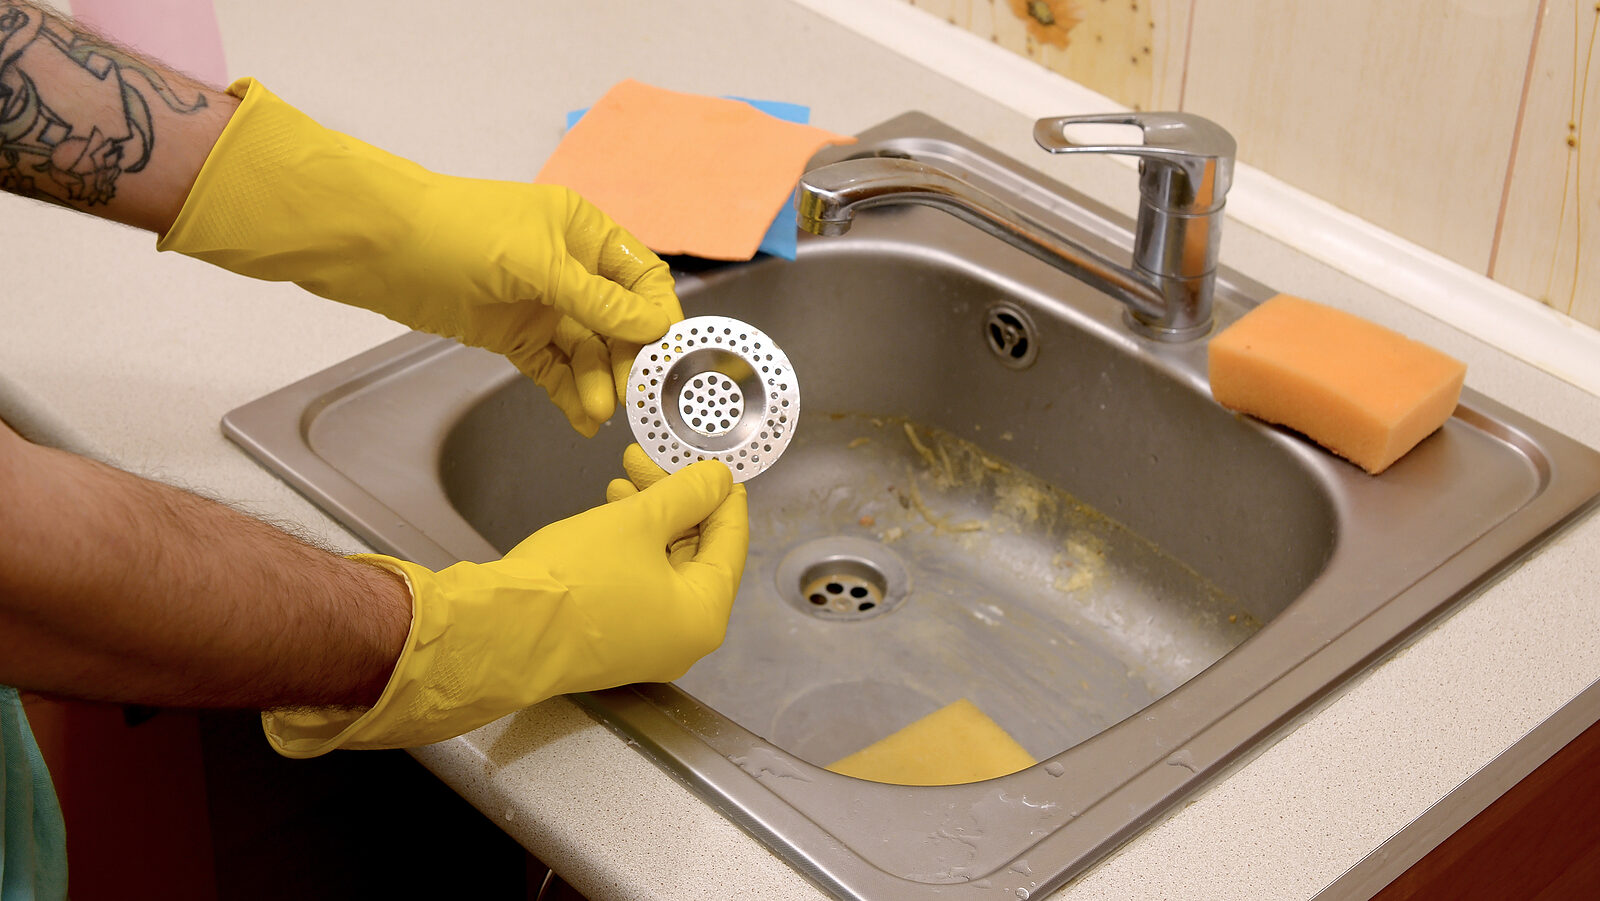 https://www.blockbusters.co.uk/wp-content/uploads/2022/04/Cleaner-In-Rubber-Gloves-Shows-Clean-Plughole-Protector-of-a-Kitchen-Sink-edited.jpg